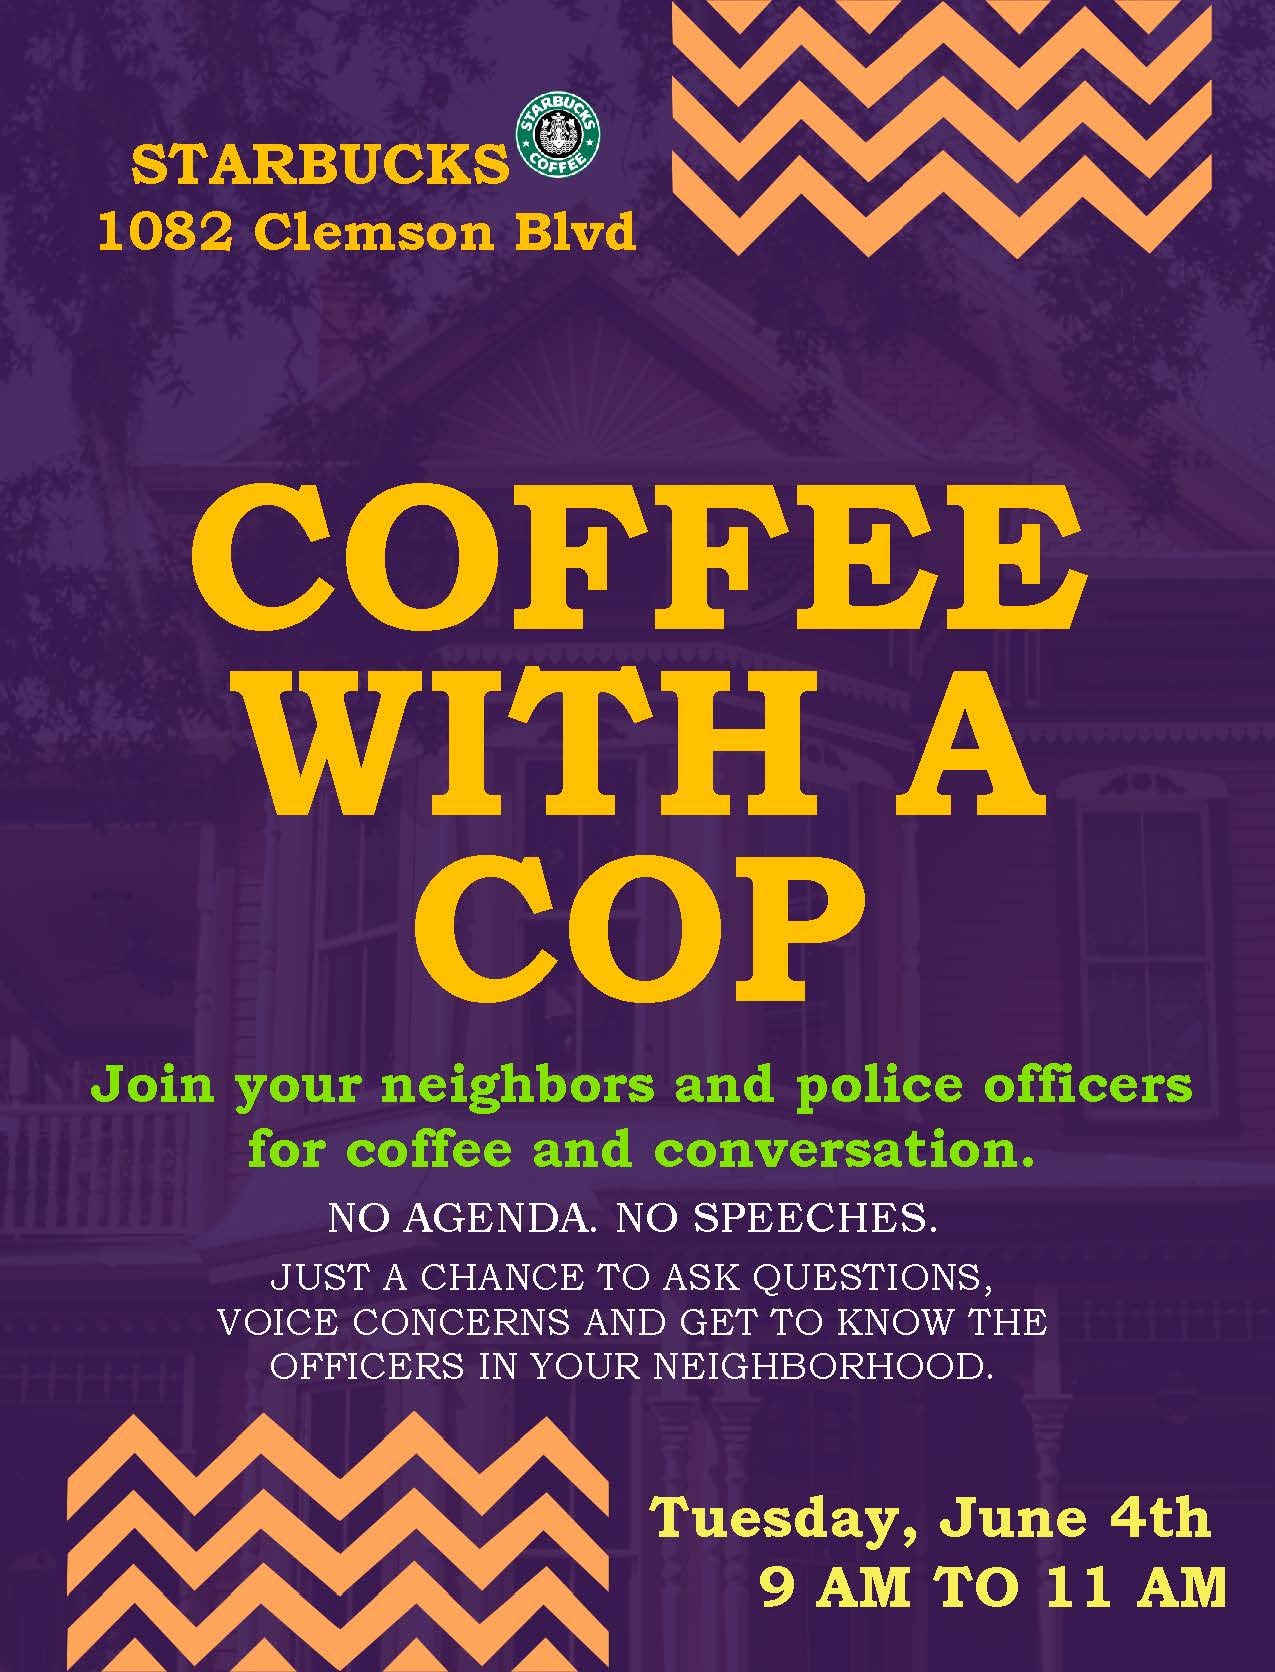 Coffee with a Cop June 4th, 2019 Starbucks Clemson 9am to 11am